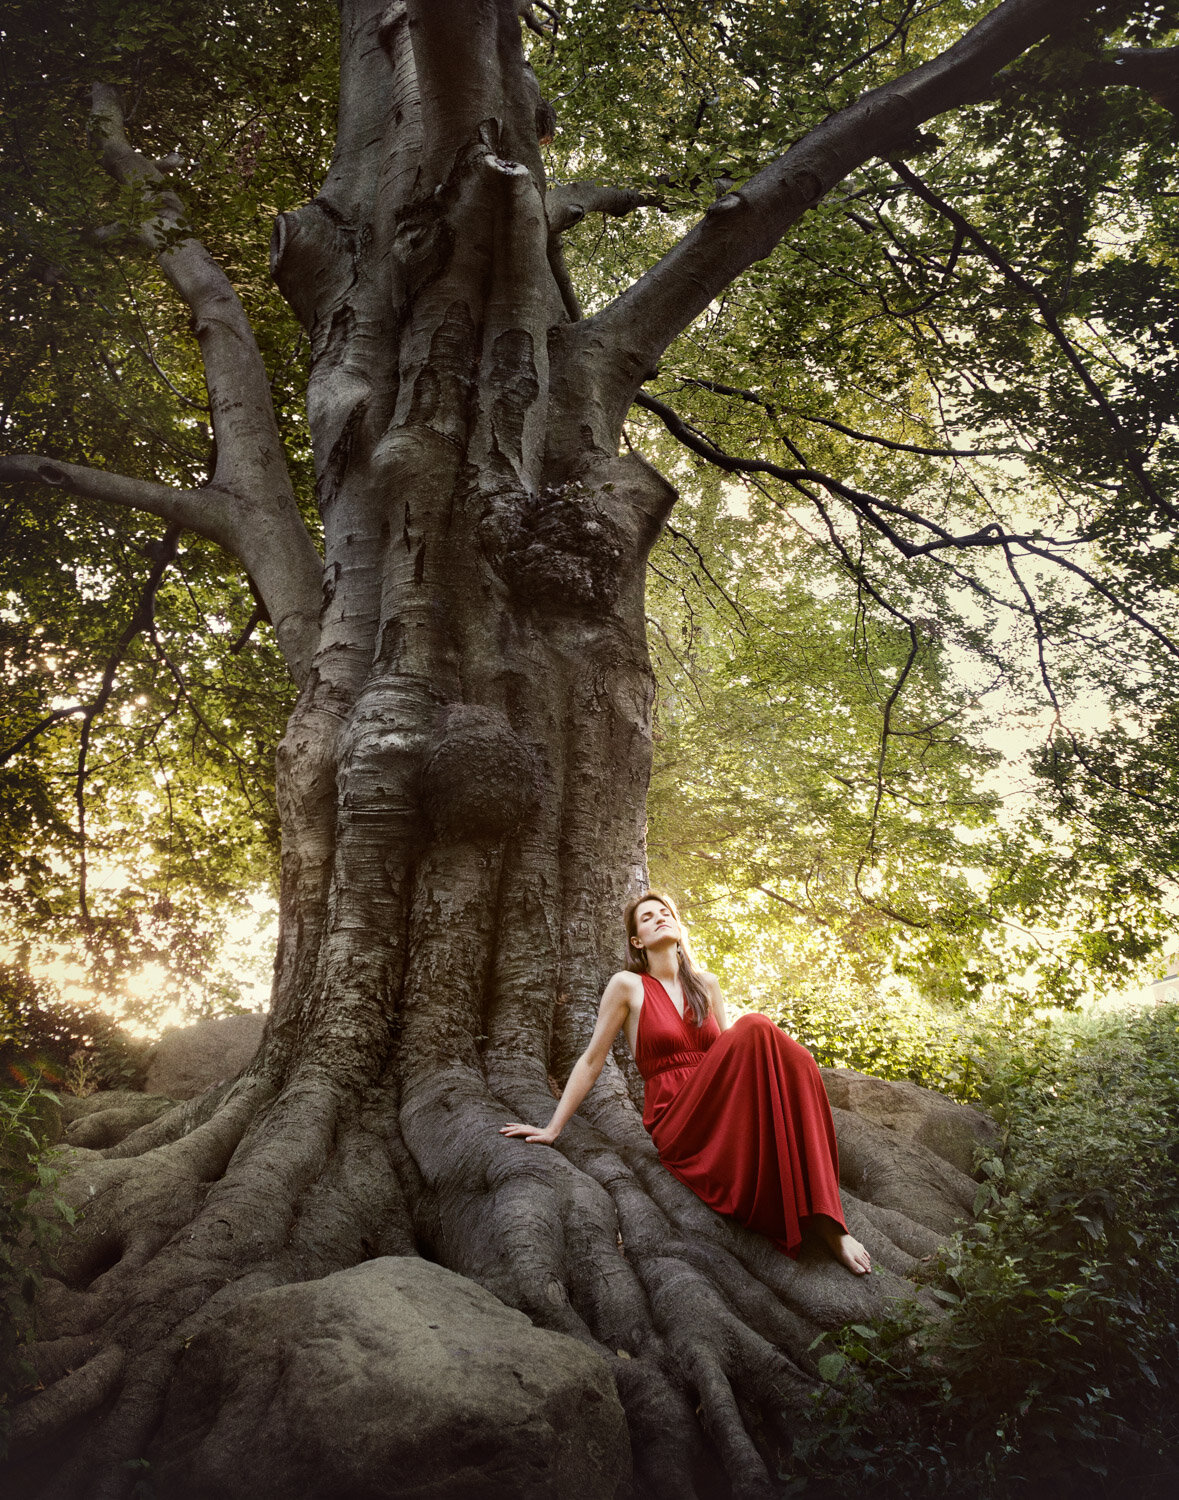 surreal portrait of musician and singer Cora Rose in red dress sitting under giant tree by creative portrait photographer Hanna Agar